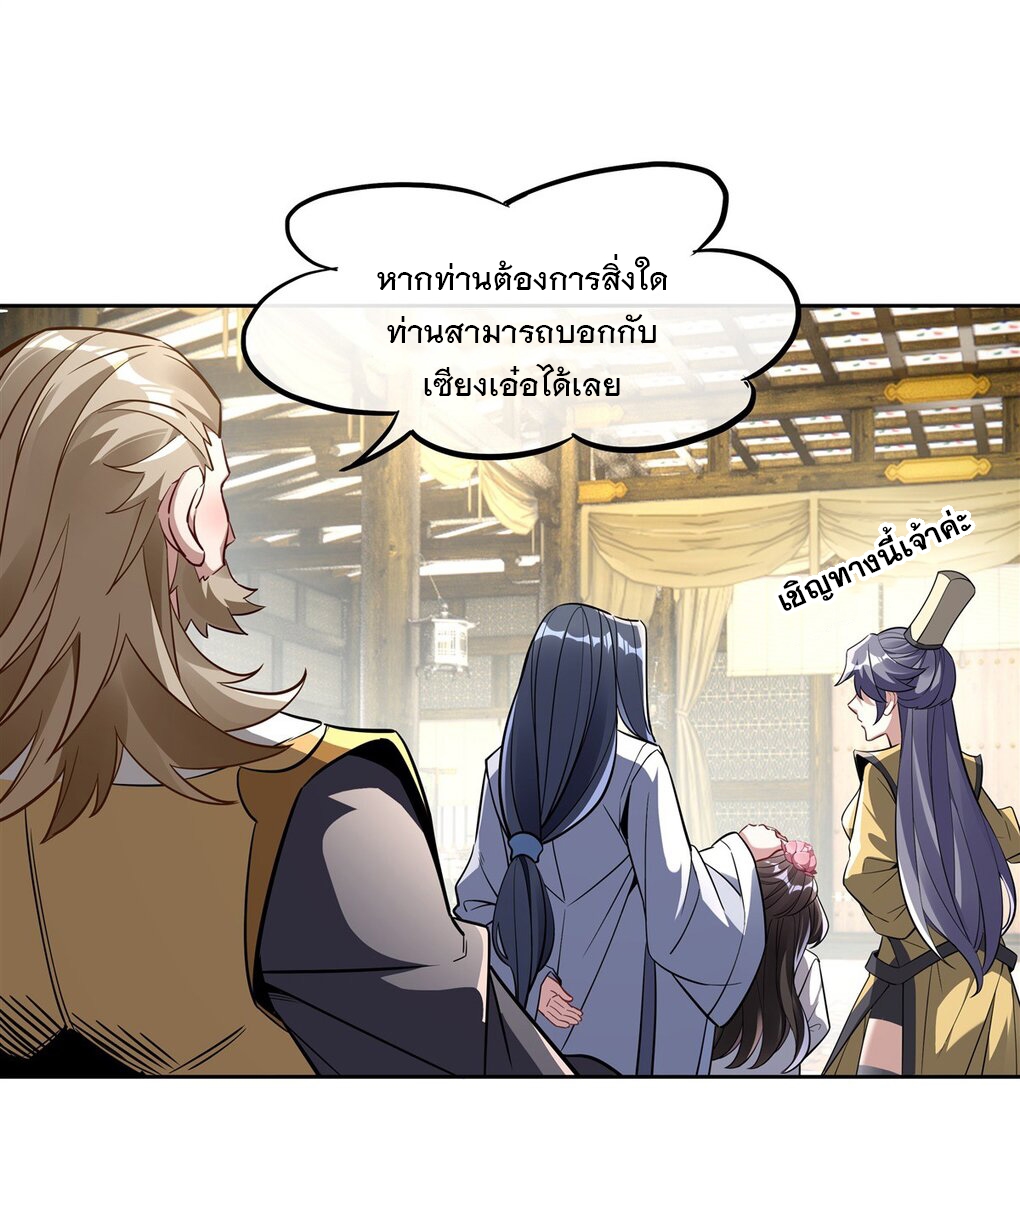 My Female Apprentices Are All Big Shots From the Future Ã Â¸â€¢Ã Â¸Â­Ã Â¸â„¢Ã Â¸â€”Ã Â¸ÂµÃ Â¹Ë† 96 (12)